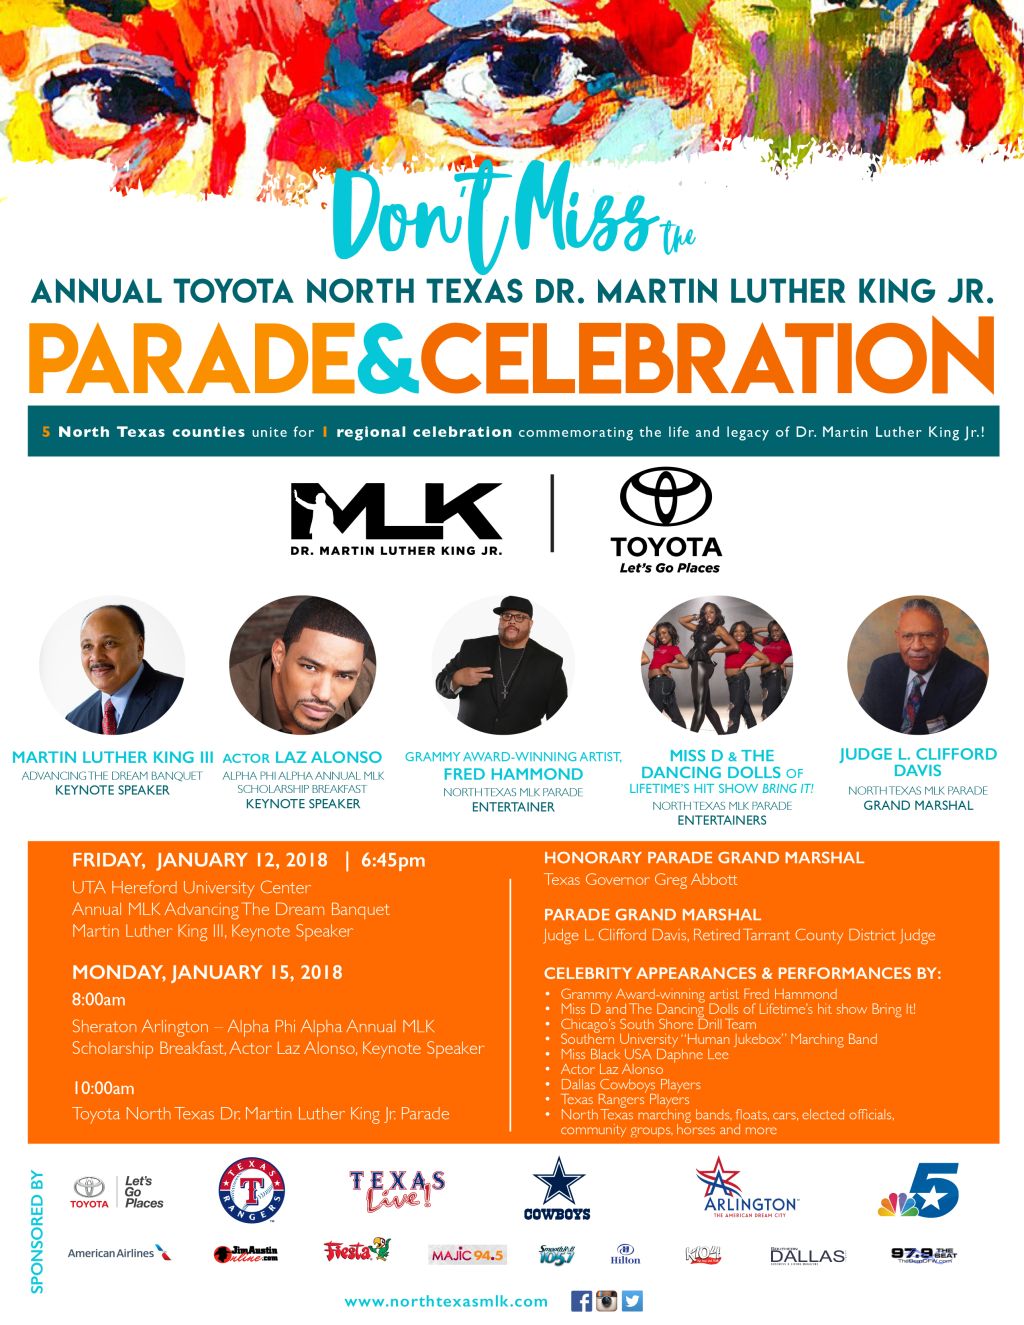 Annual Toyota North Texas Dr. Martin Luther King Jr Parade & Celebration